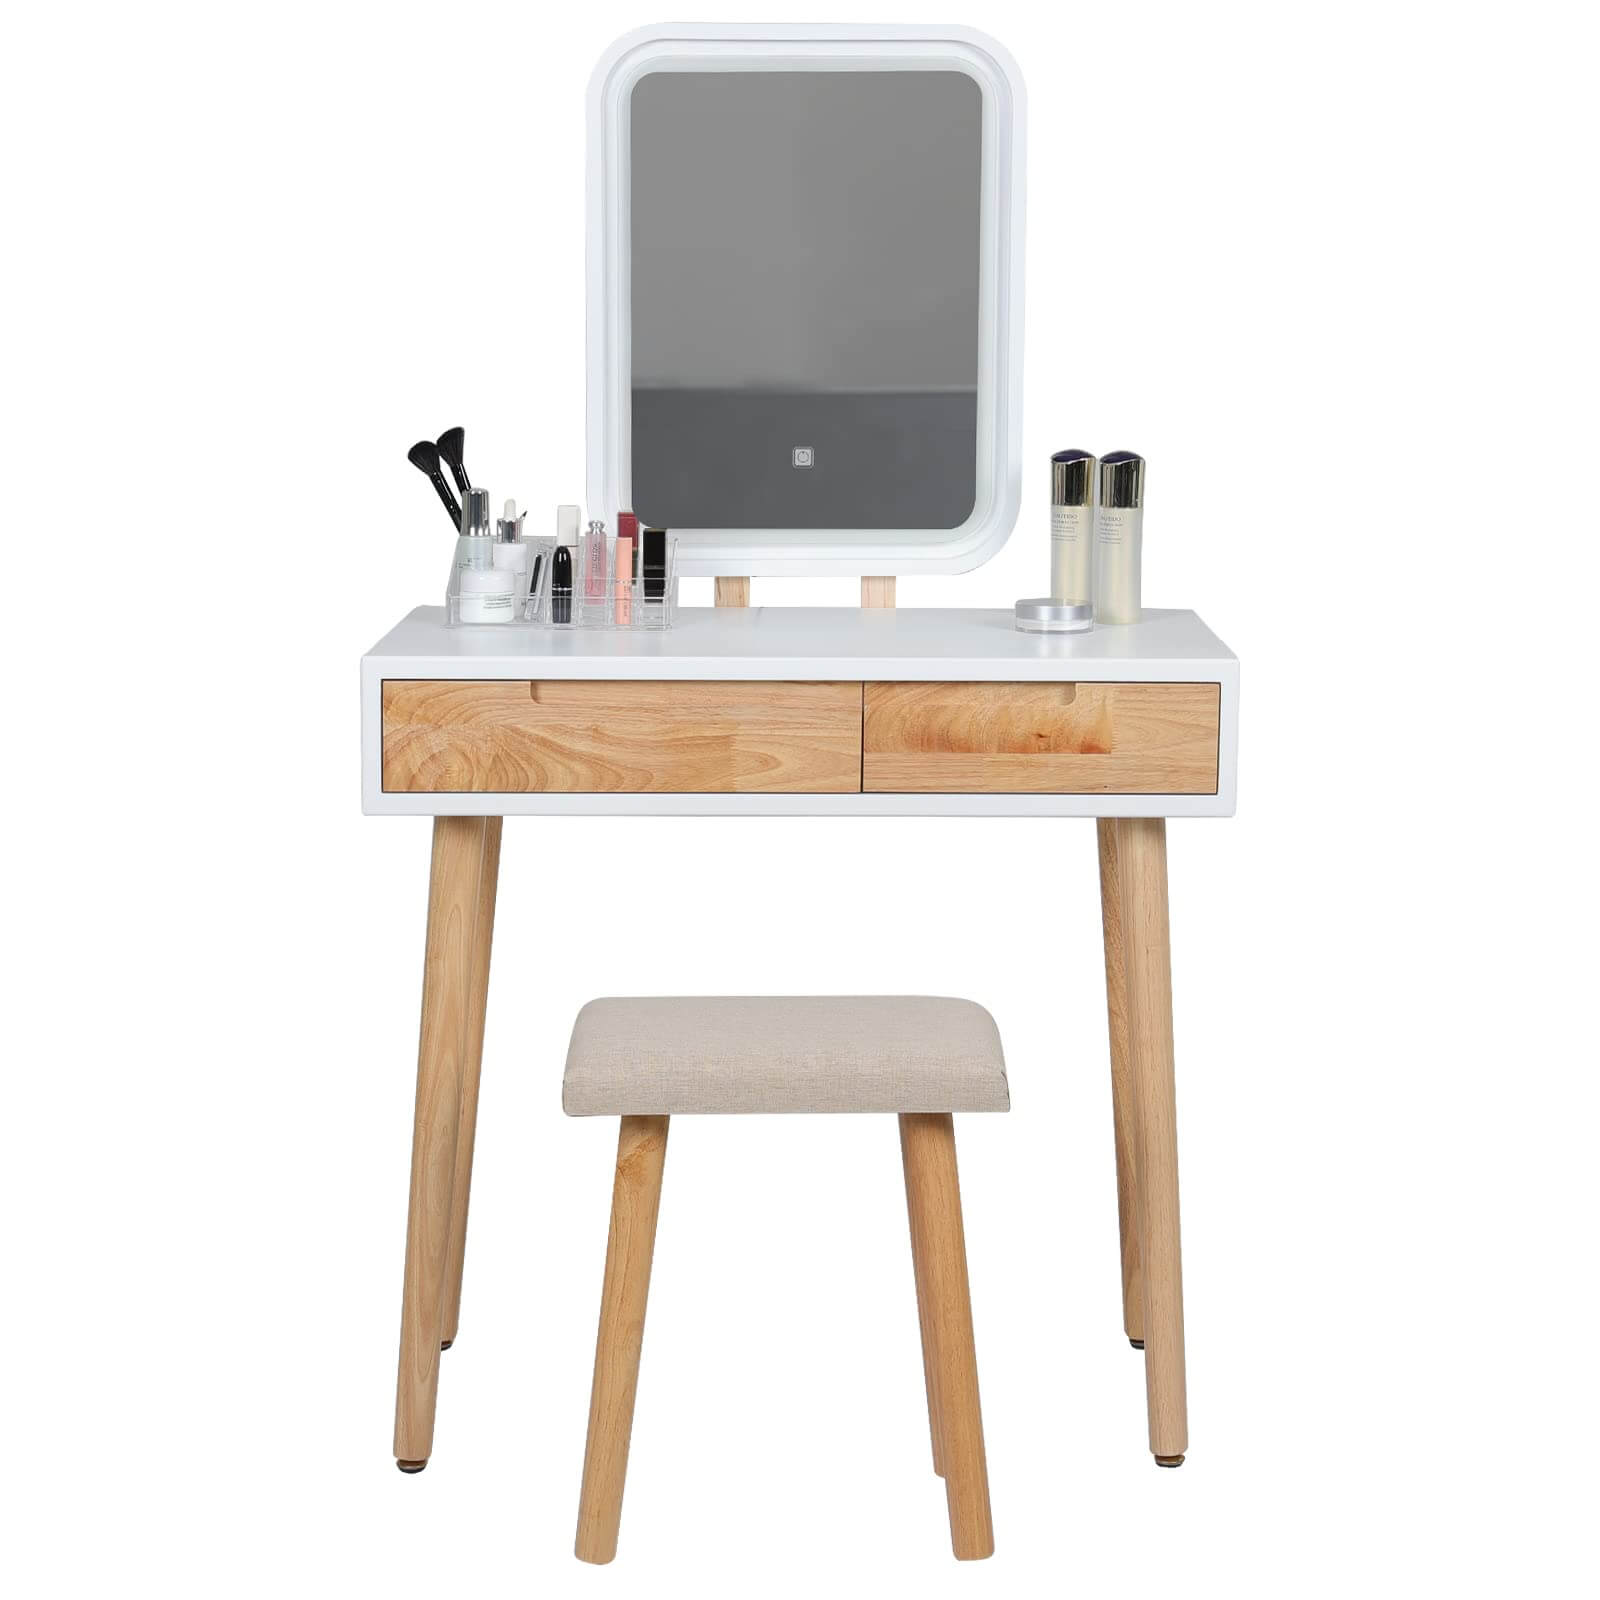 Elecwish Vanity Makeup Table Set with Adjustable LED Square Mirror IF113